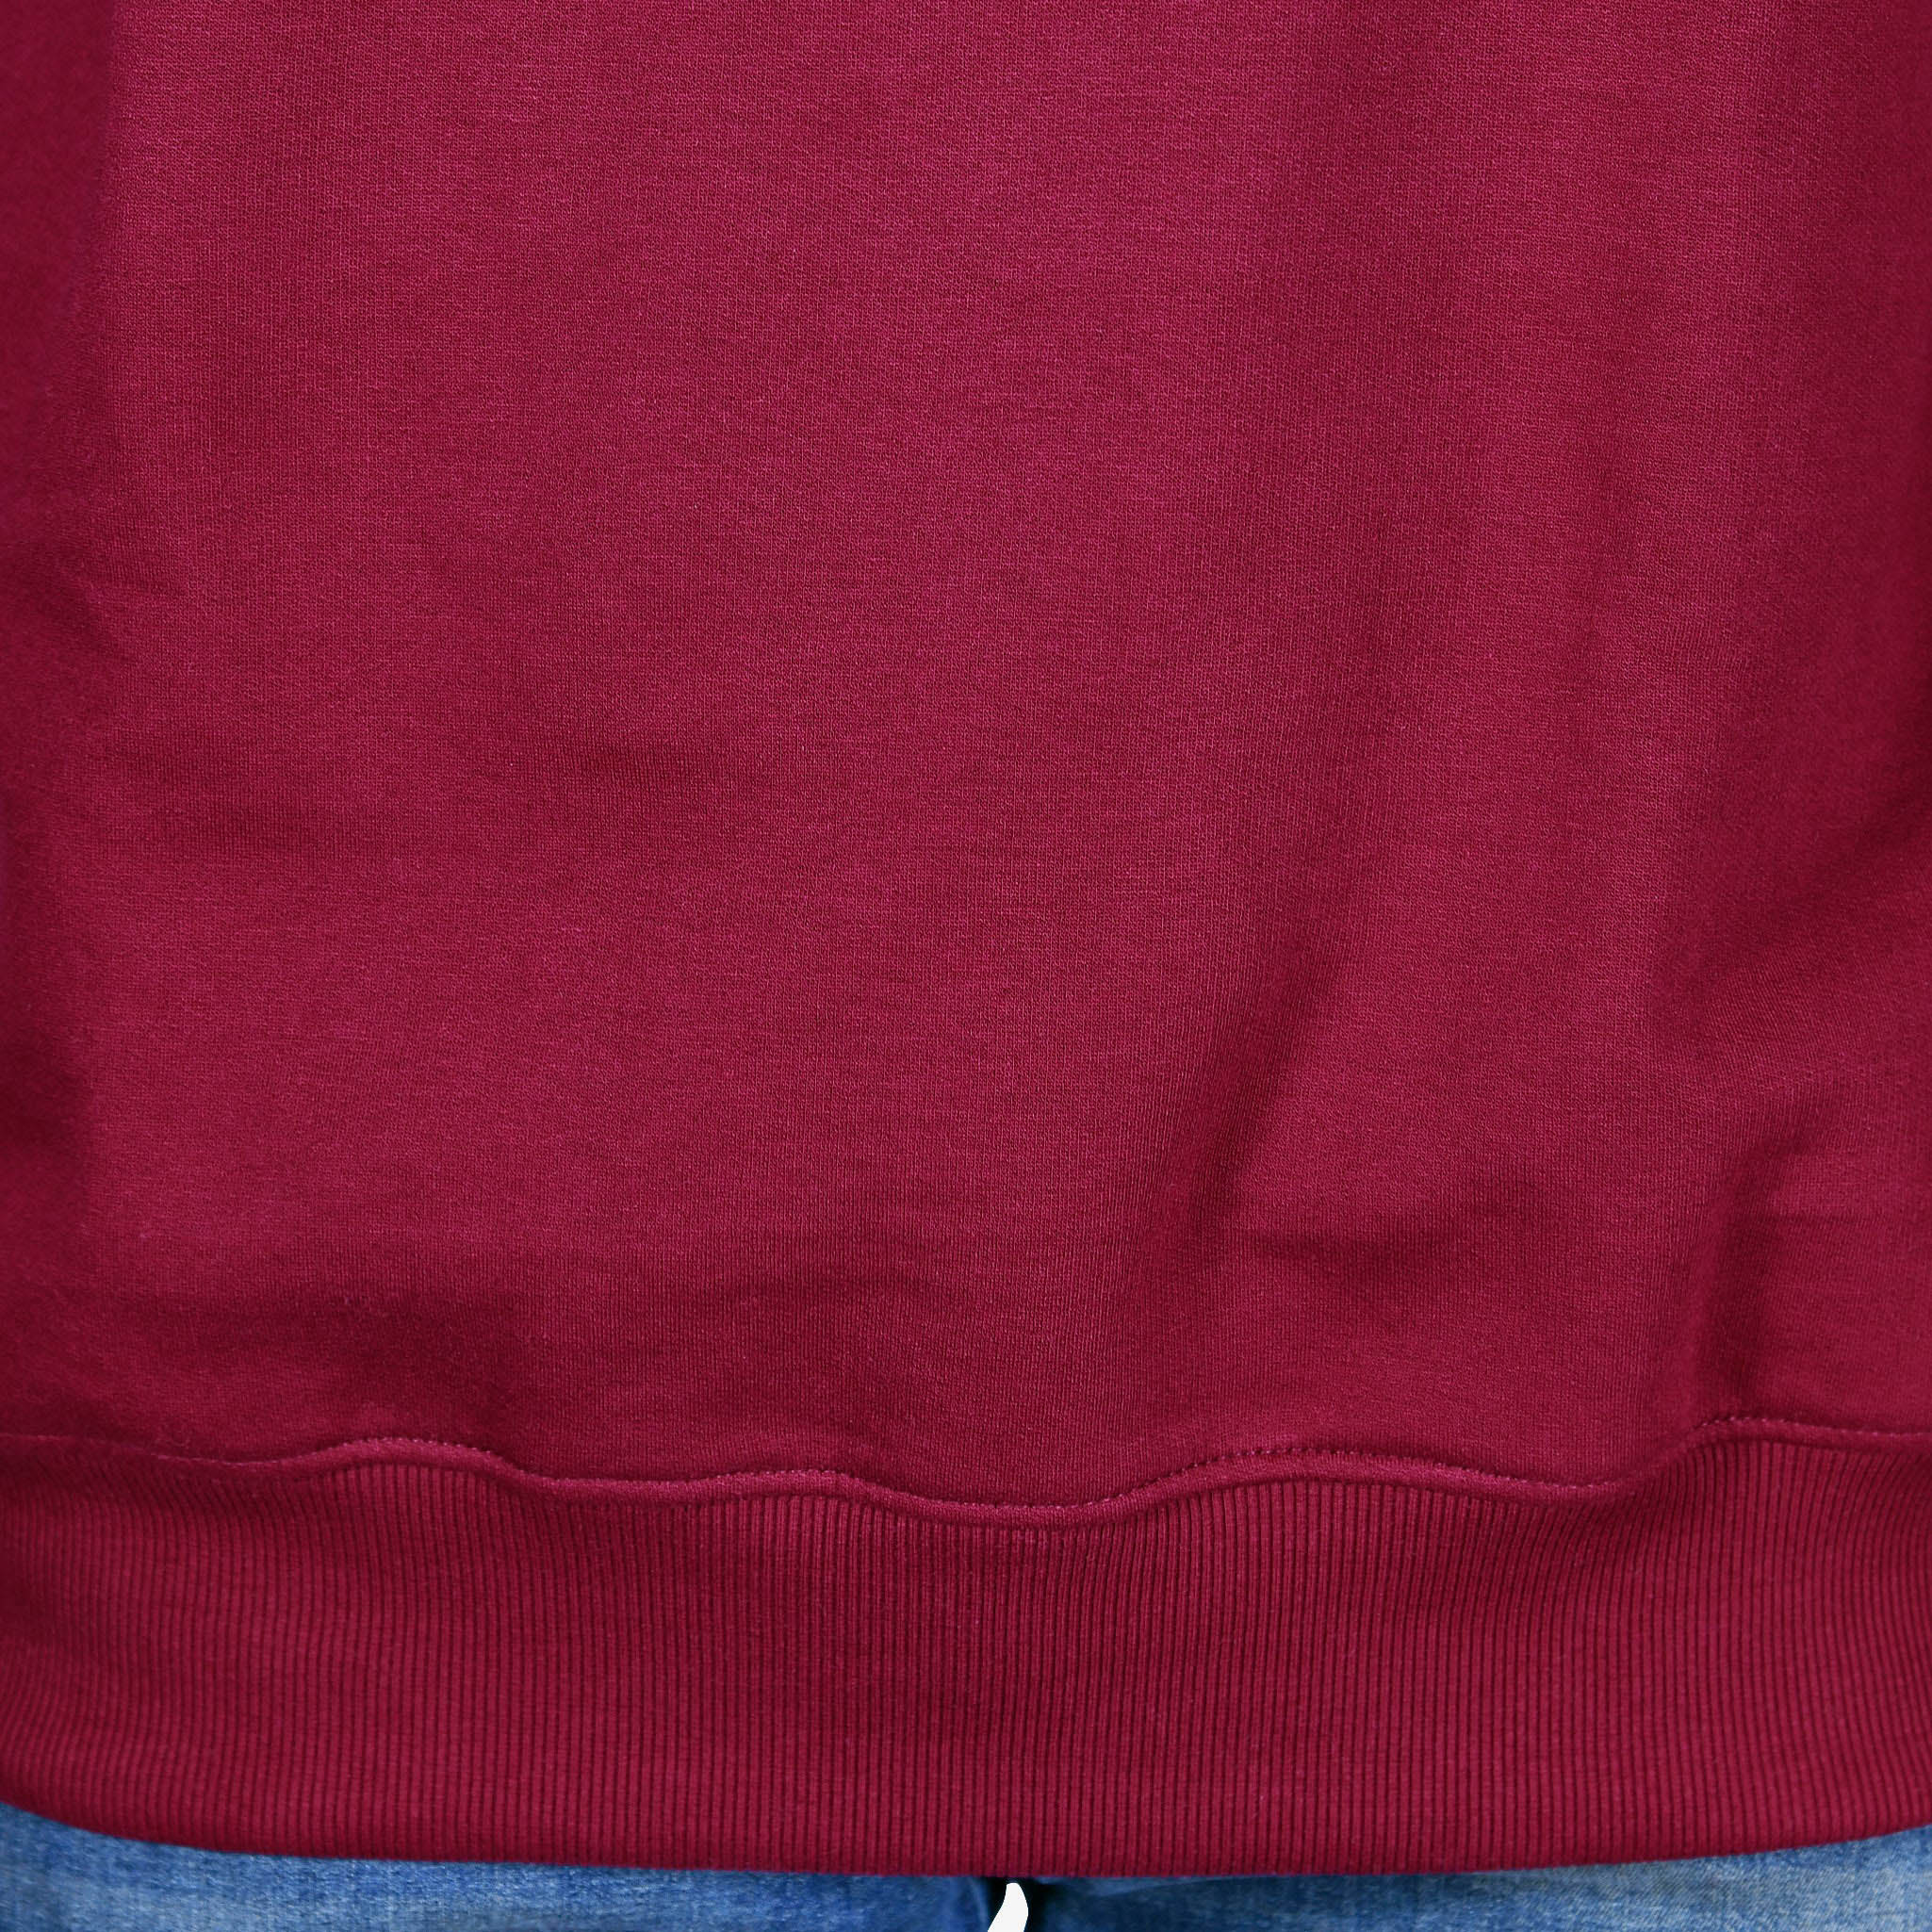 A person modeling an oversized maroon sweatshirt with a relaxed fit